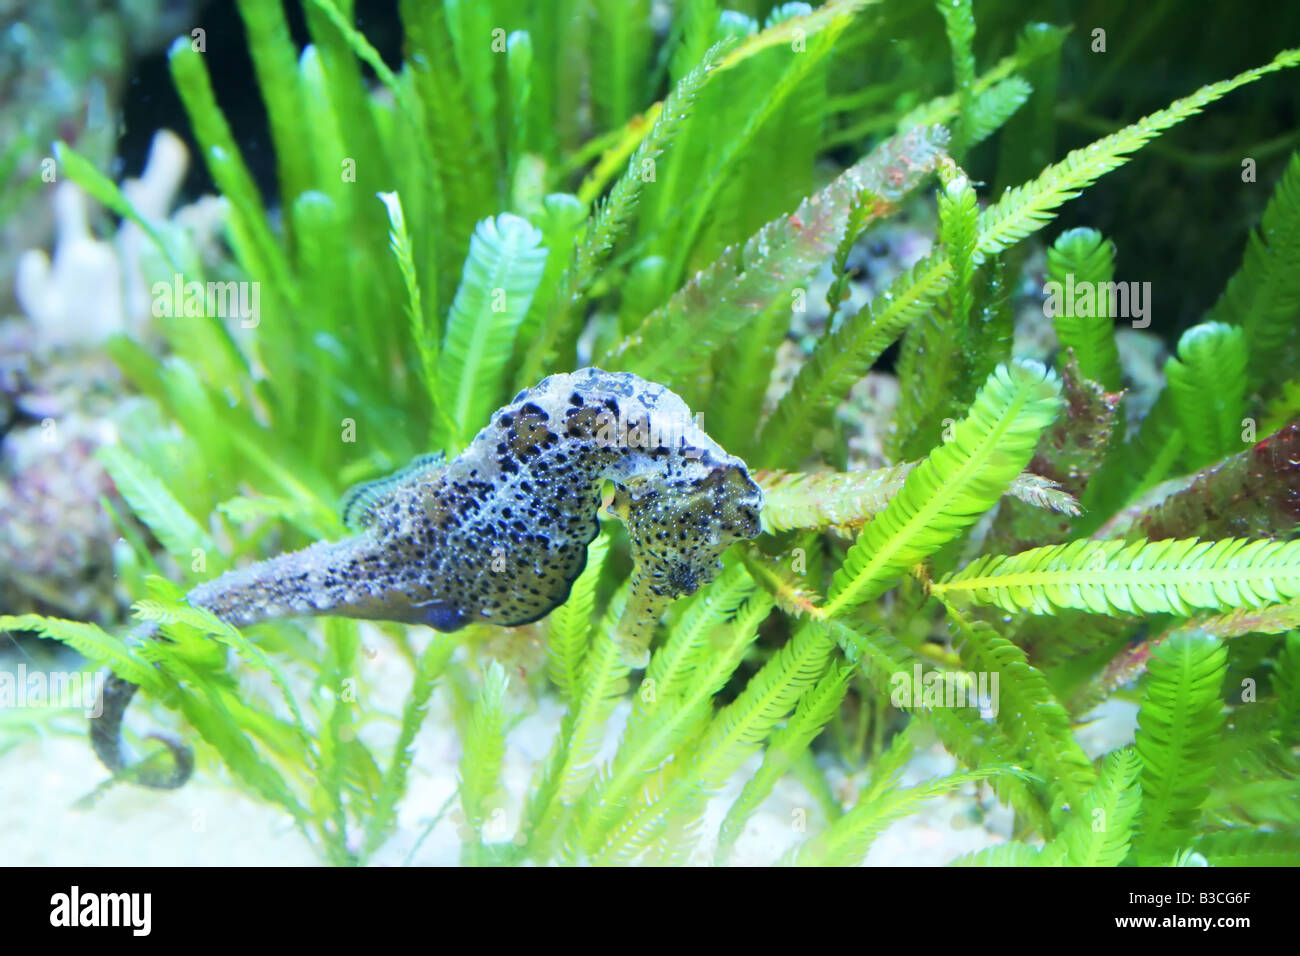 seahorse in sea weeds Stock Photo